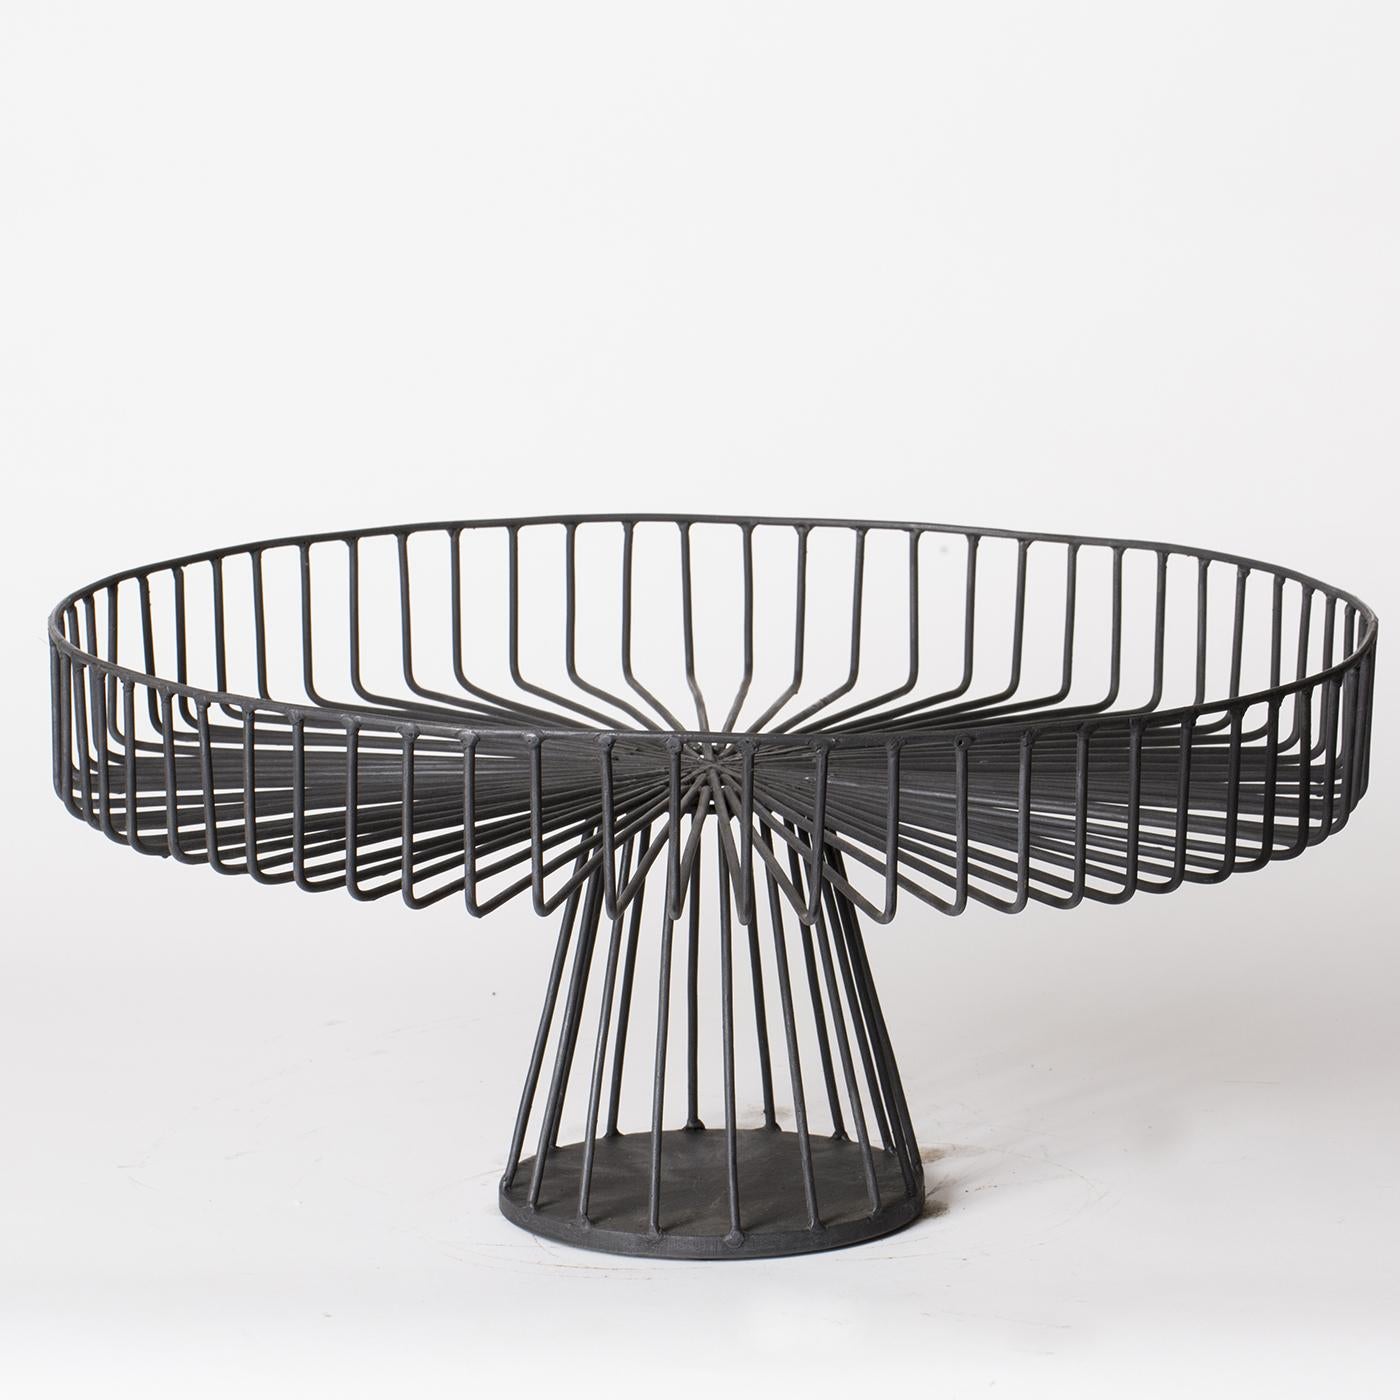 This sculptural centerpiece by Sciortino is formed of tempered iron wire with a matte black finish. The rigid straightness of the lines contrasts delightfully with the rounded dimensions of the base. Product dimensions may vary slightly. 



 